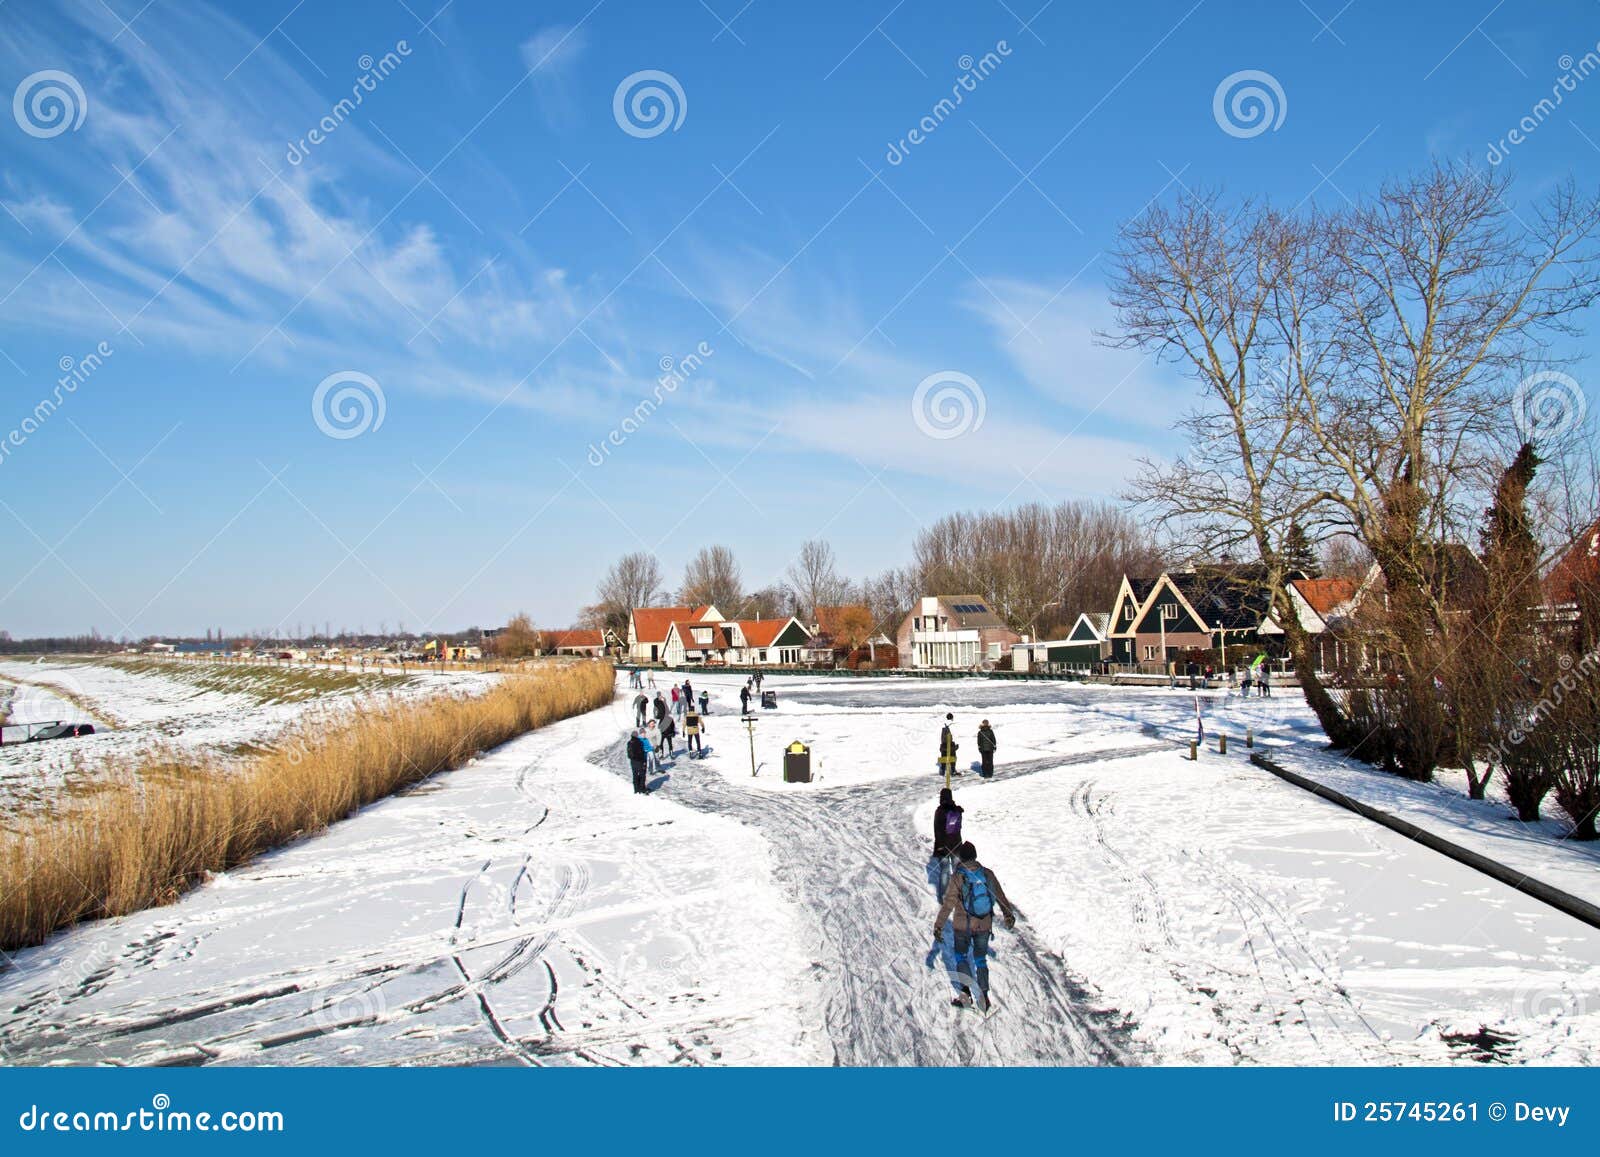 Ice Skating The Netherlands Stock Image - Image of winter, holland